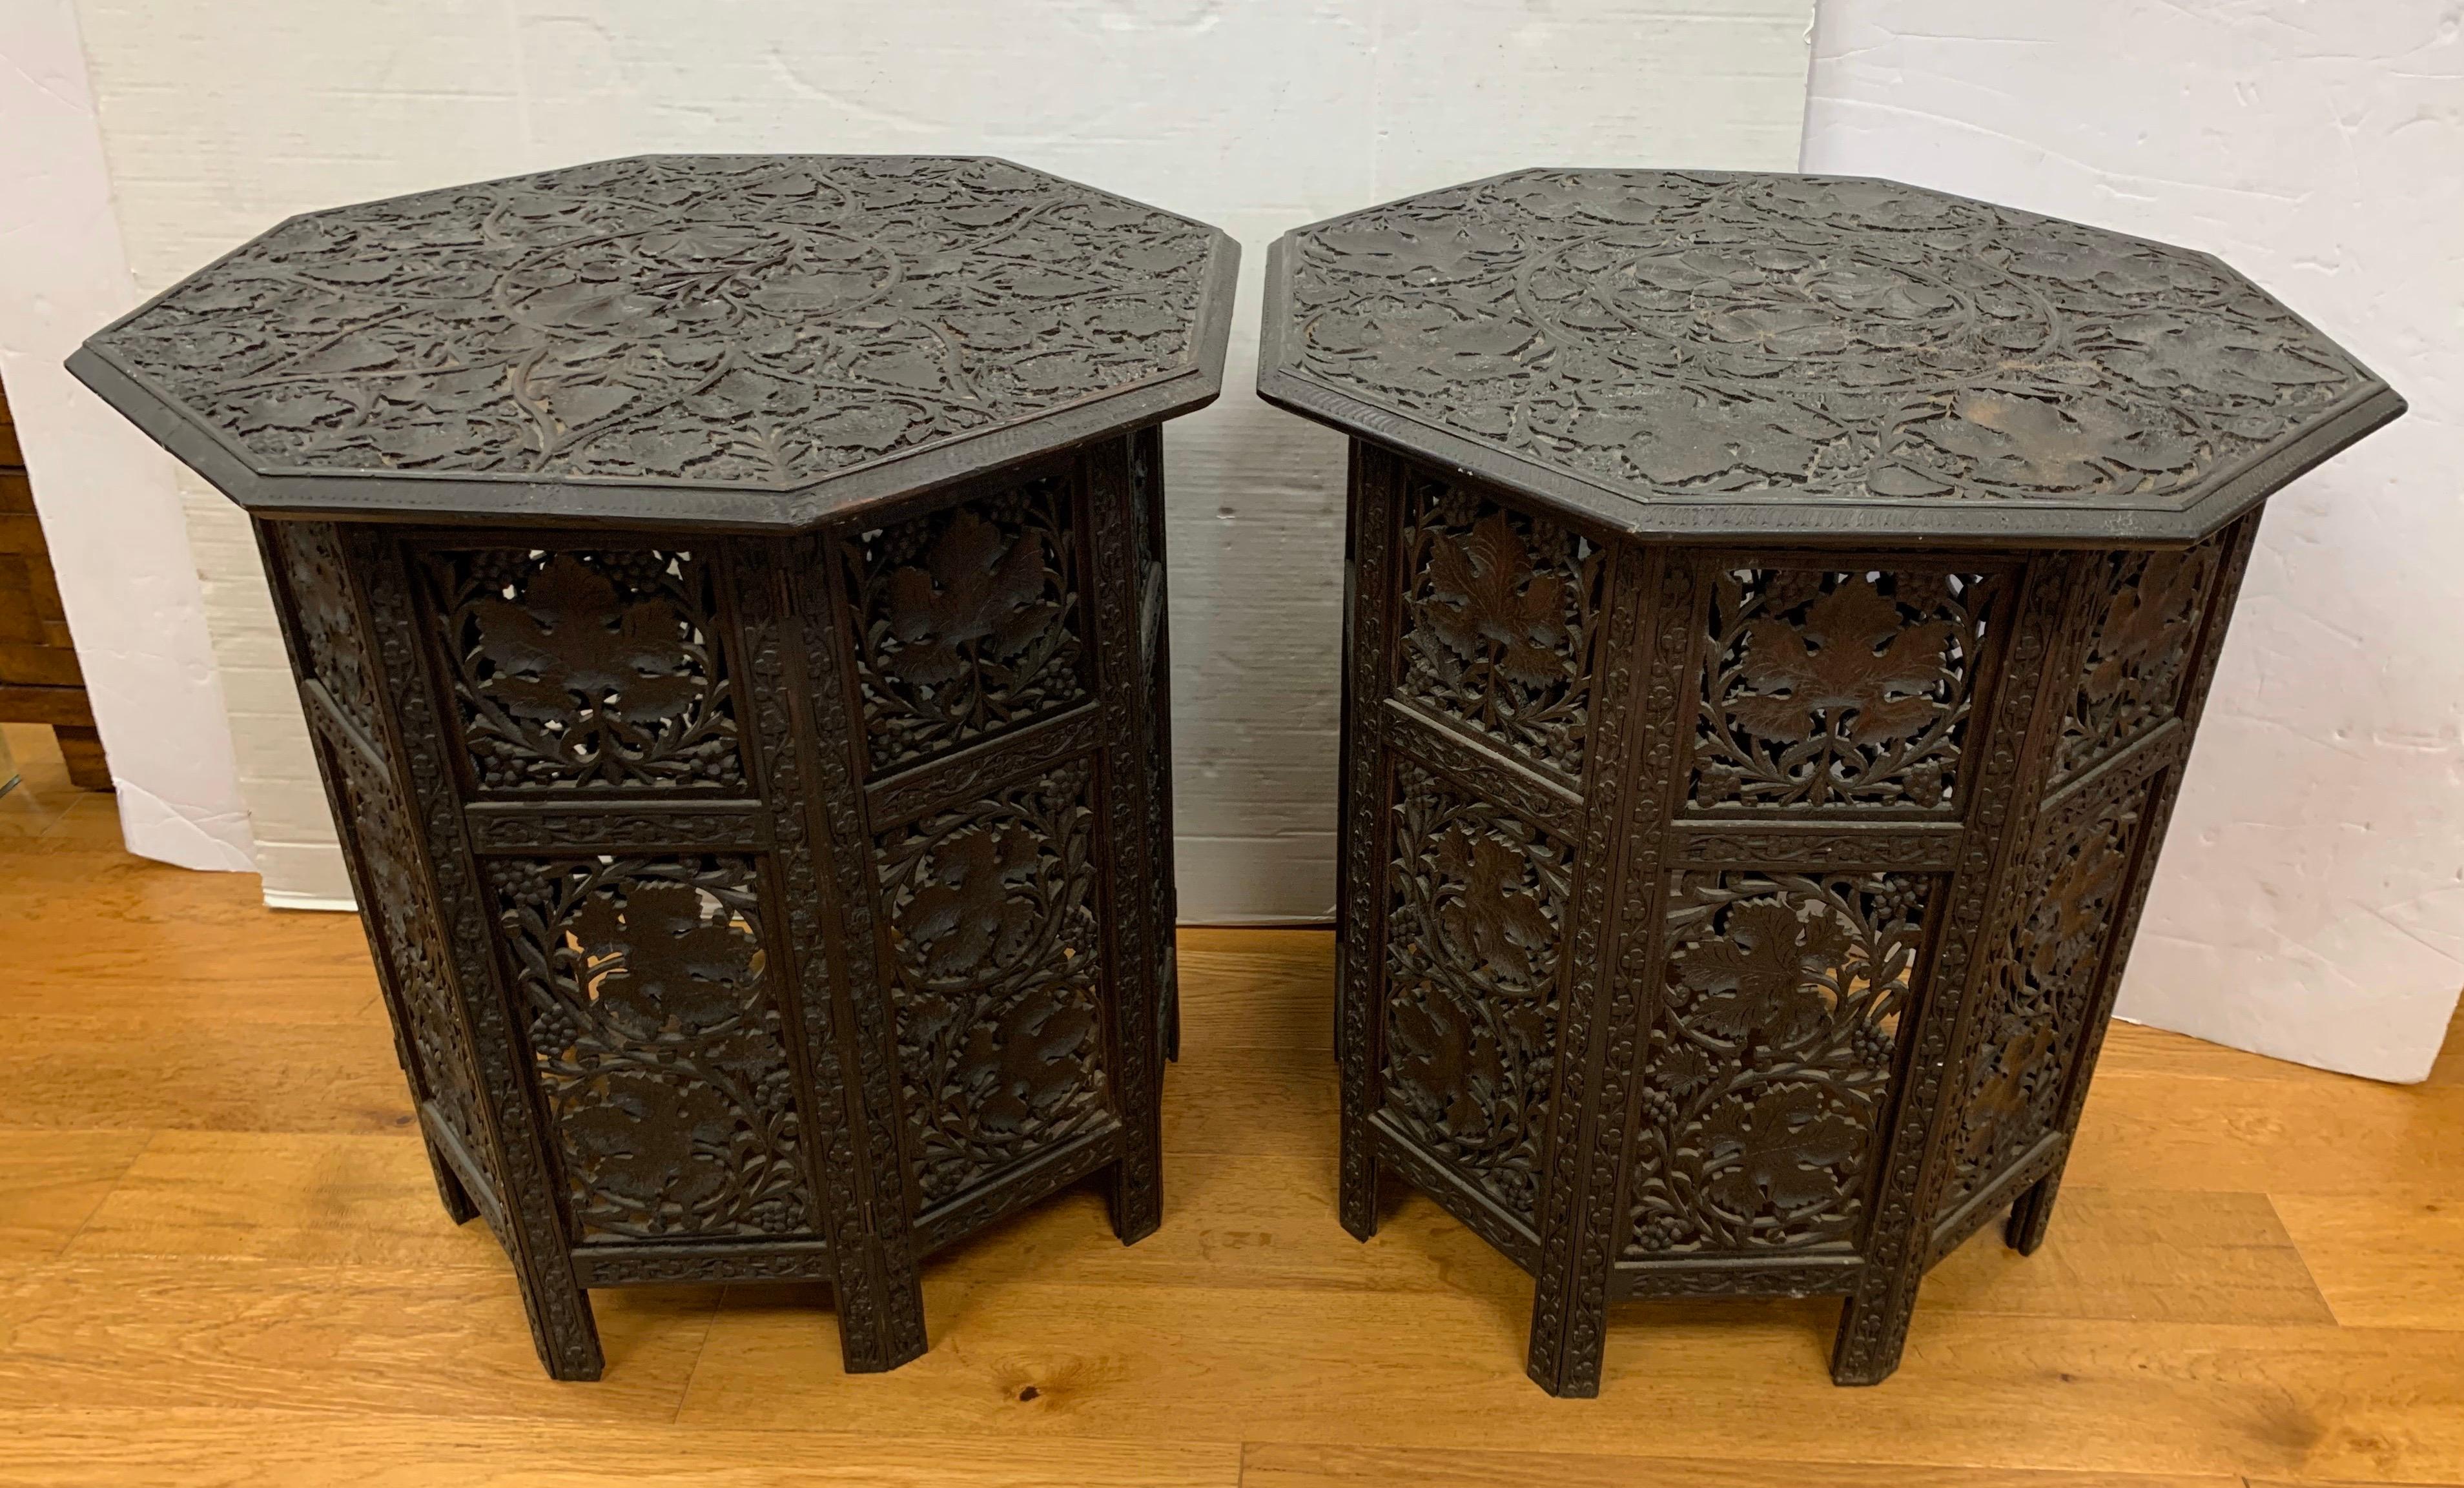 Anglo-Indian carved hardwood octagonal occasional table dating from the early 20th century. It has a removable top and an eight sided folding base, both intricately carved with grape vines.